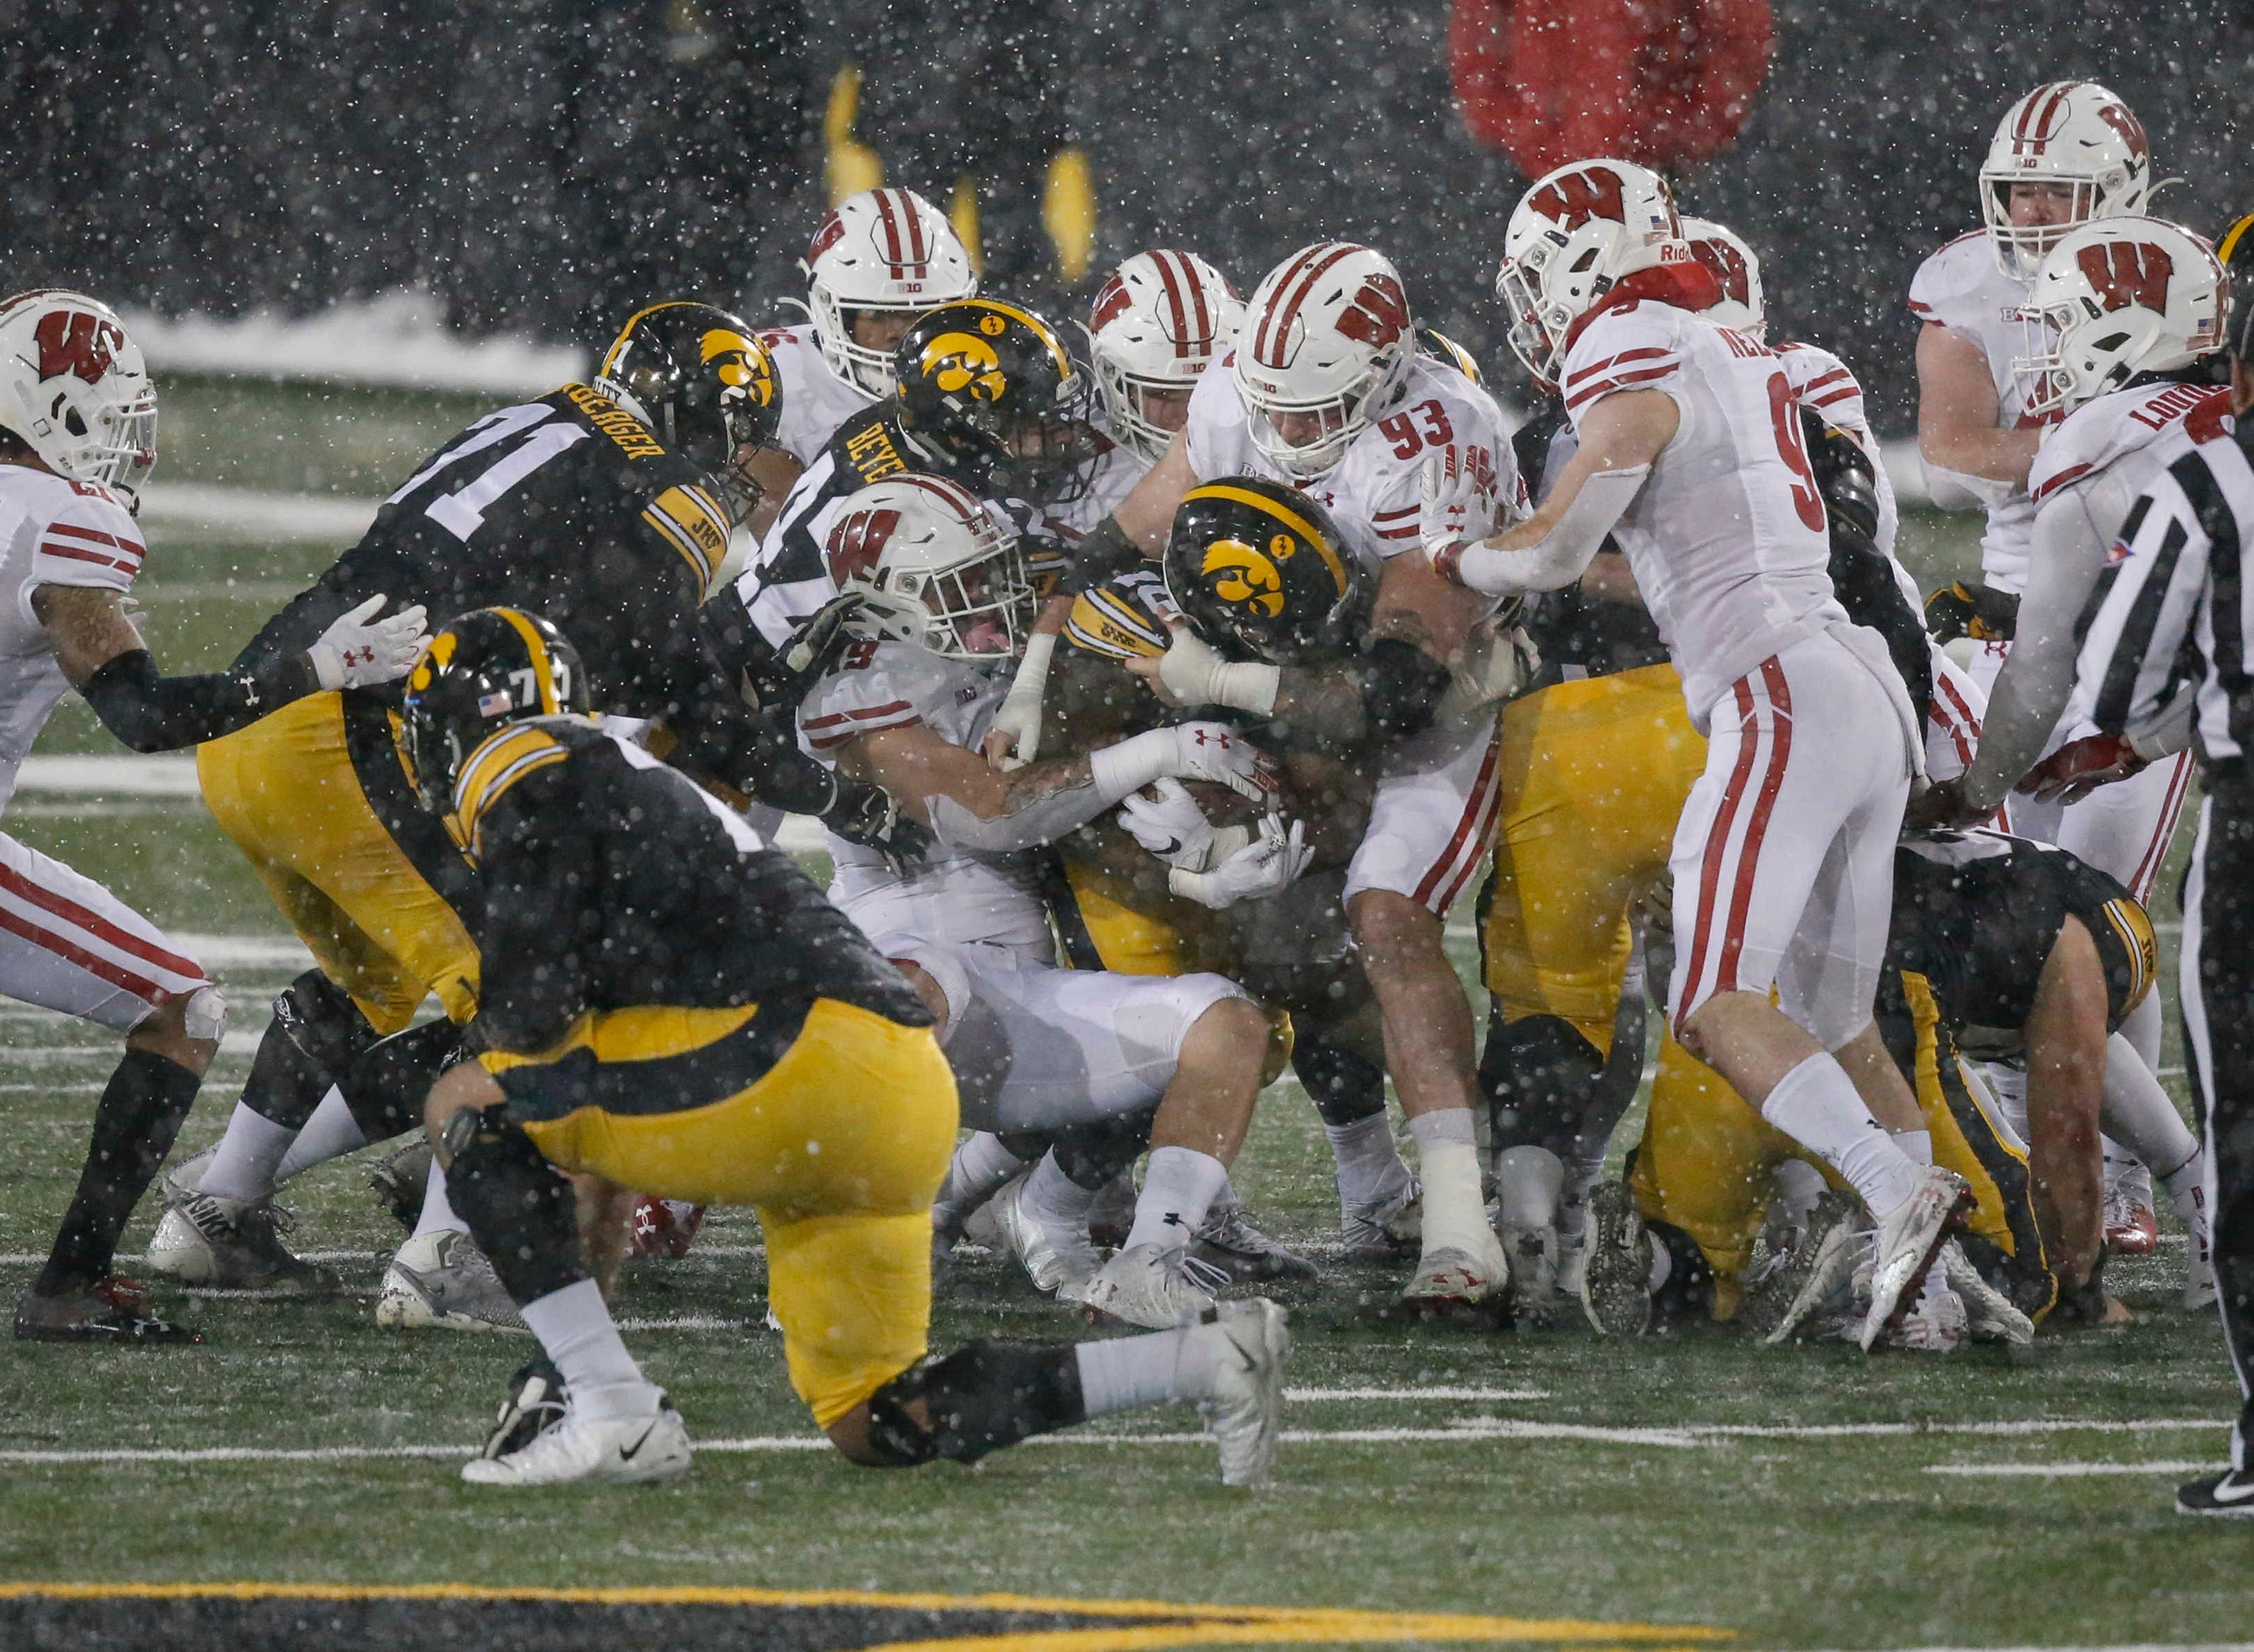 Iowa senior running back Mekhi Sargent is swallowed up by the Wisconsin defense in the fourth quarter on Saturday, Dec. 12, 2020, at Kinnick Stadium in Iowa City, Iowa.